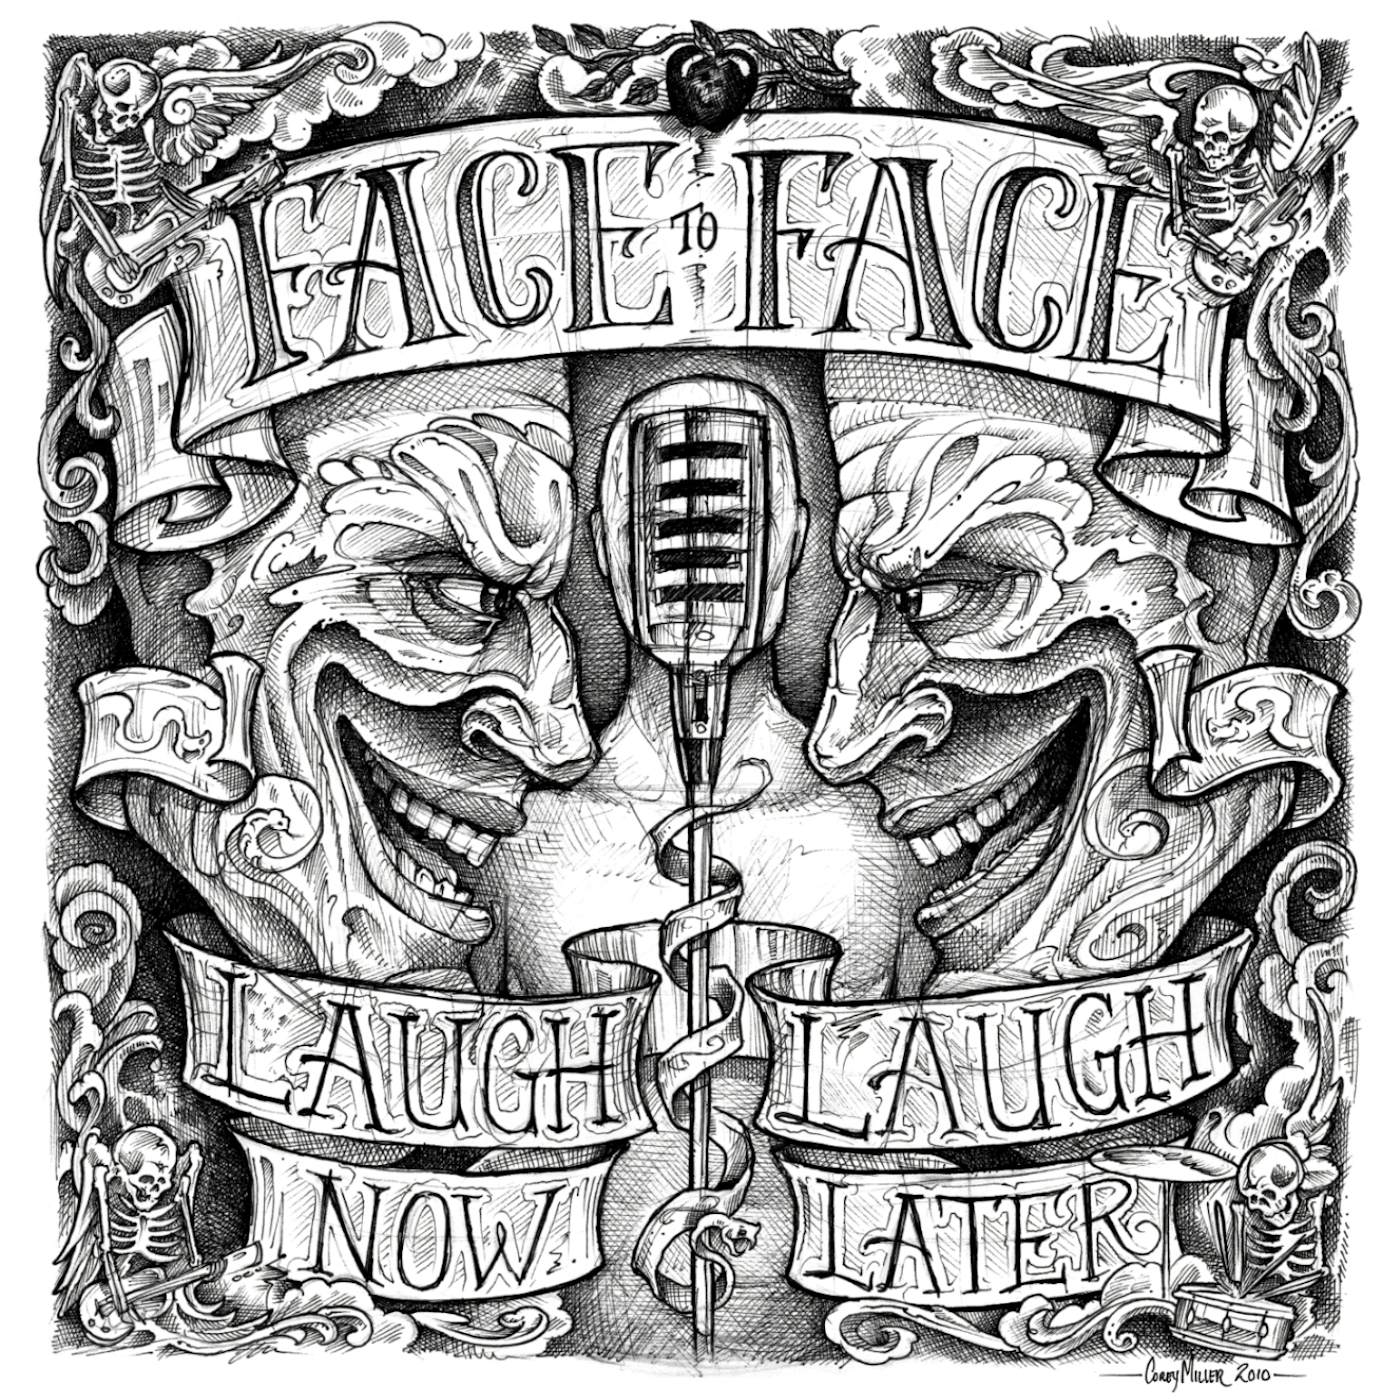 Face To Face LAUGH NOW LAUGH LATER CD